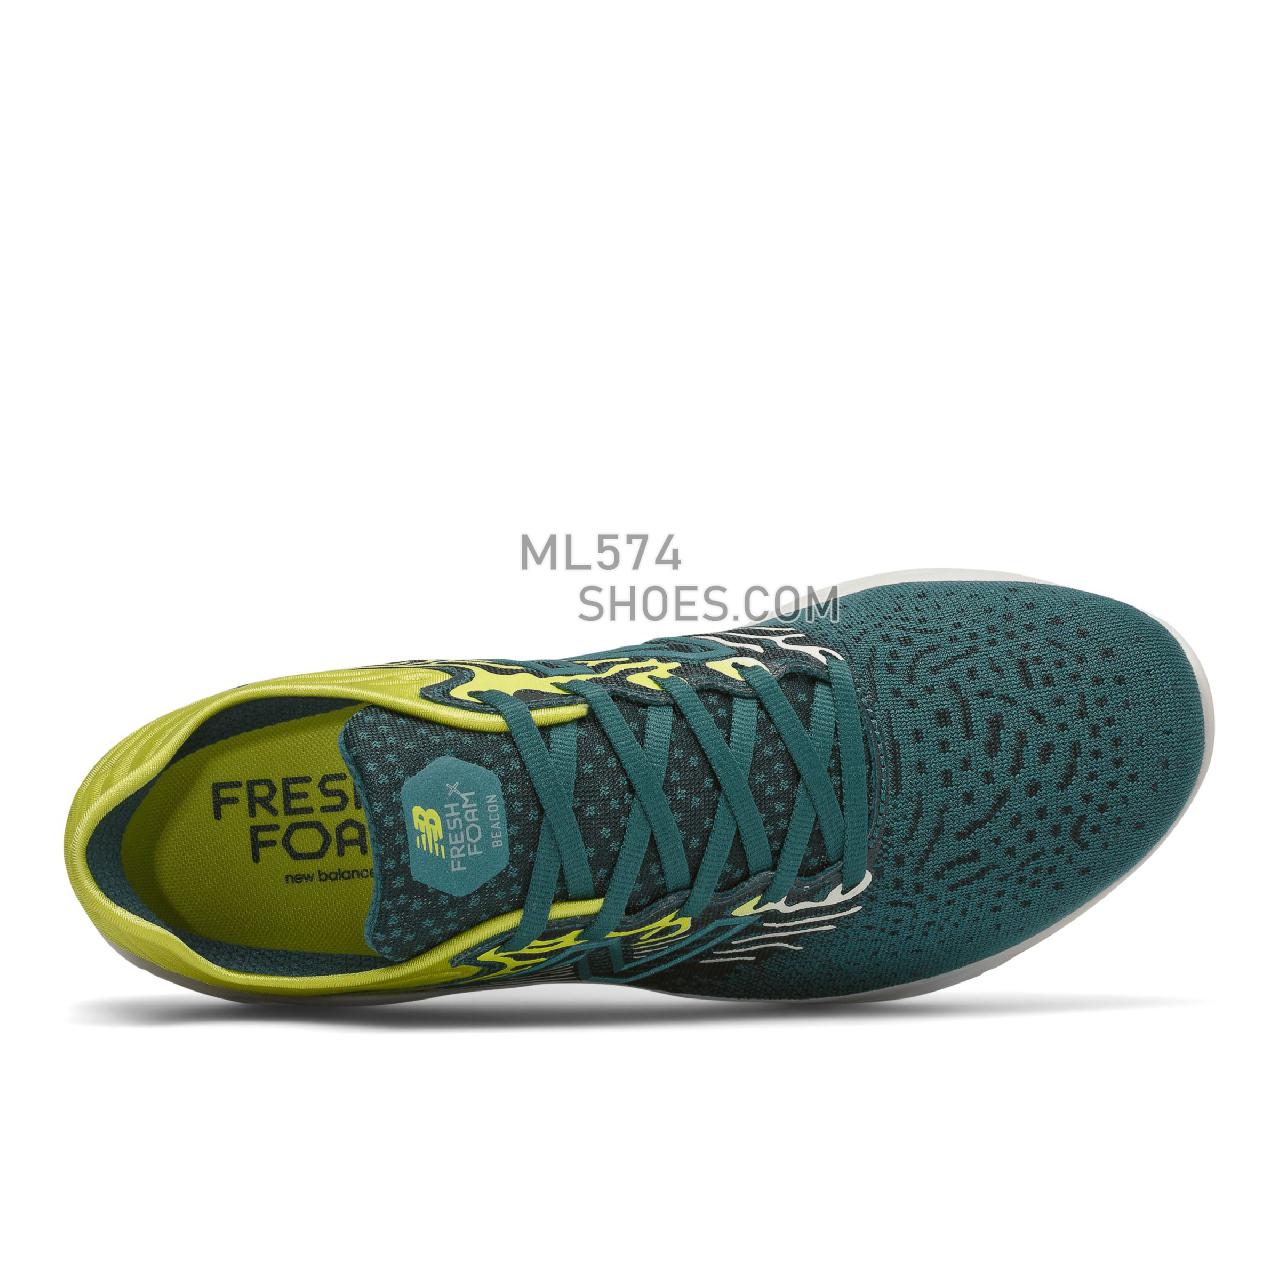 New Balance Fresh Foam Beacon v3 - Men's Neutral Running - Mountain Teal with Sulpher Yellow - MBECNCT3